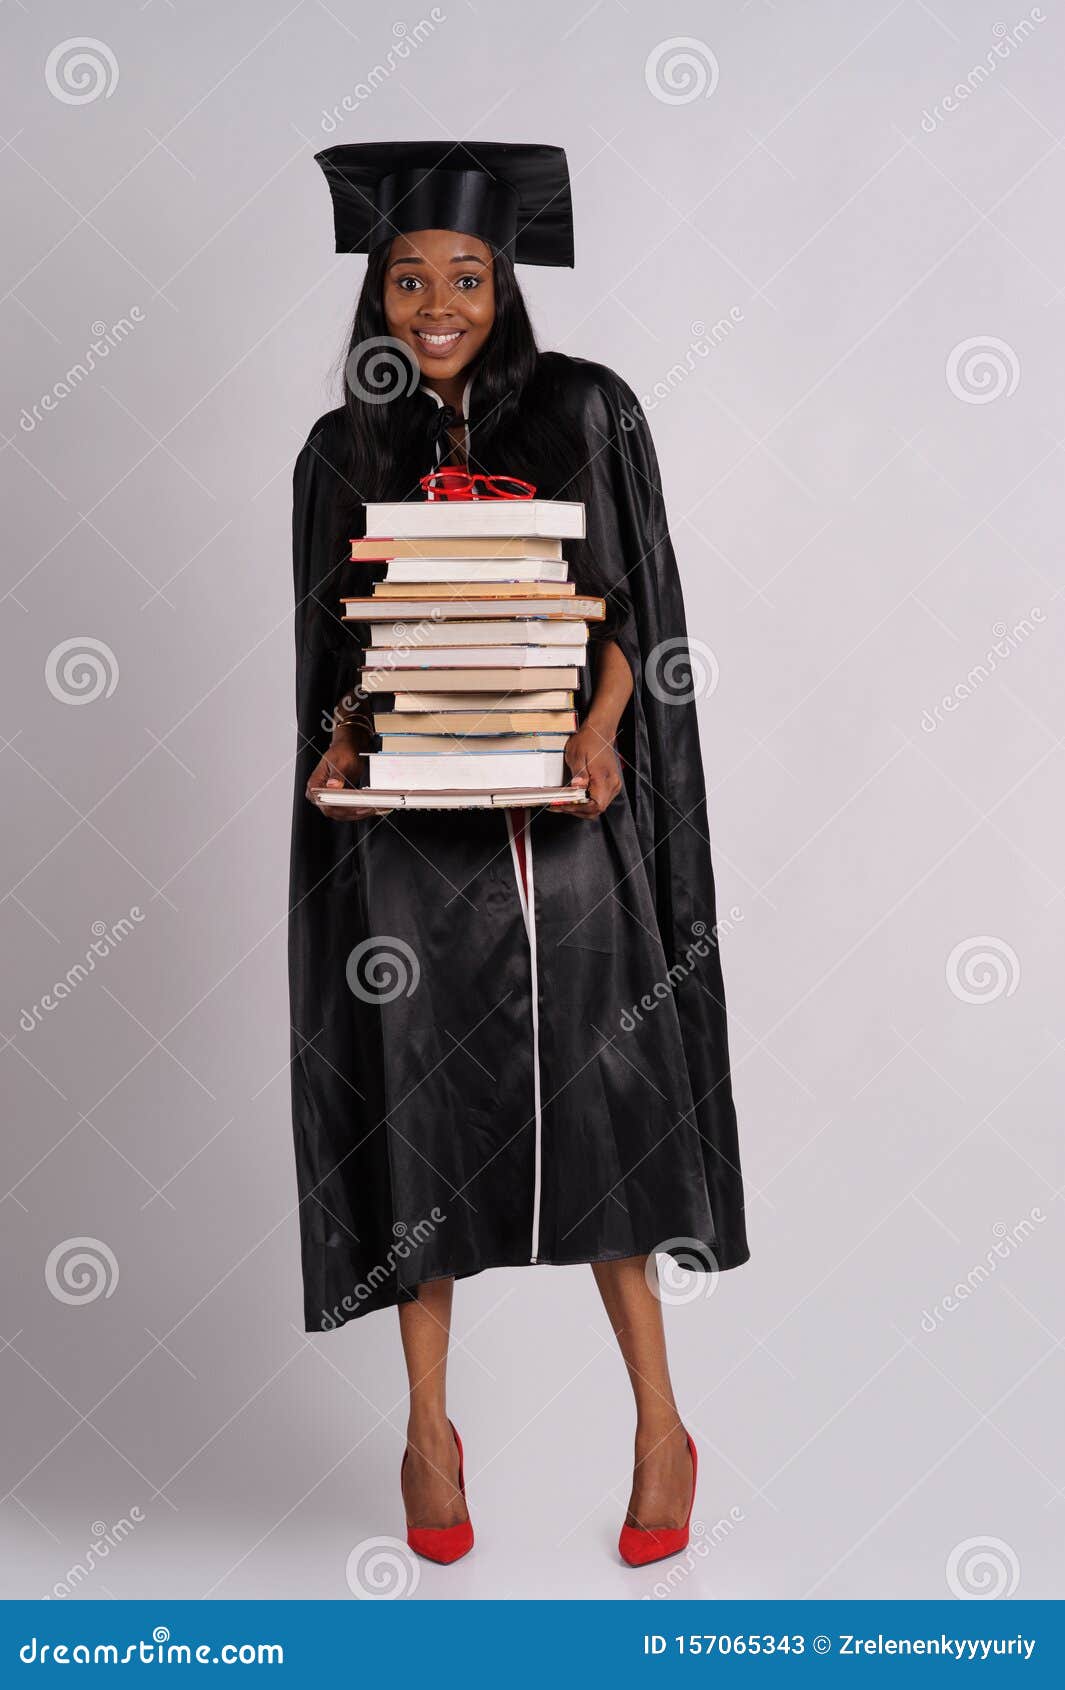 Young Woman in a Graduation Gown · Free Stock Photo